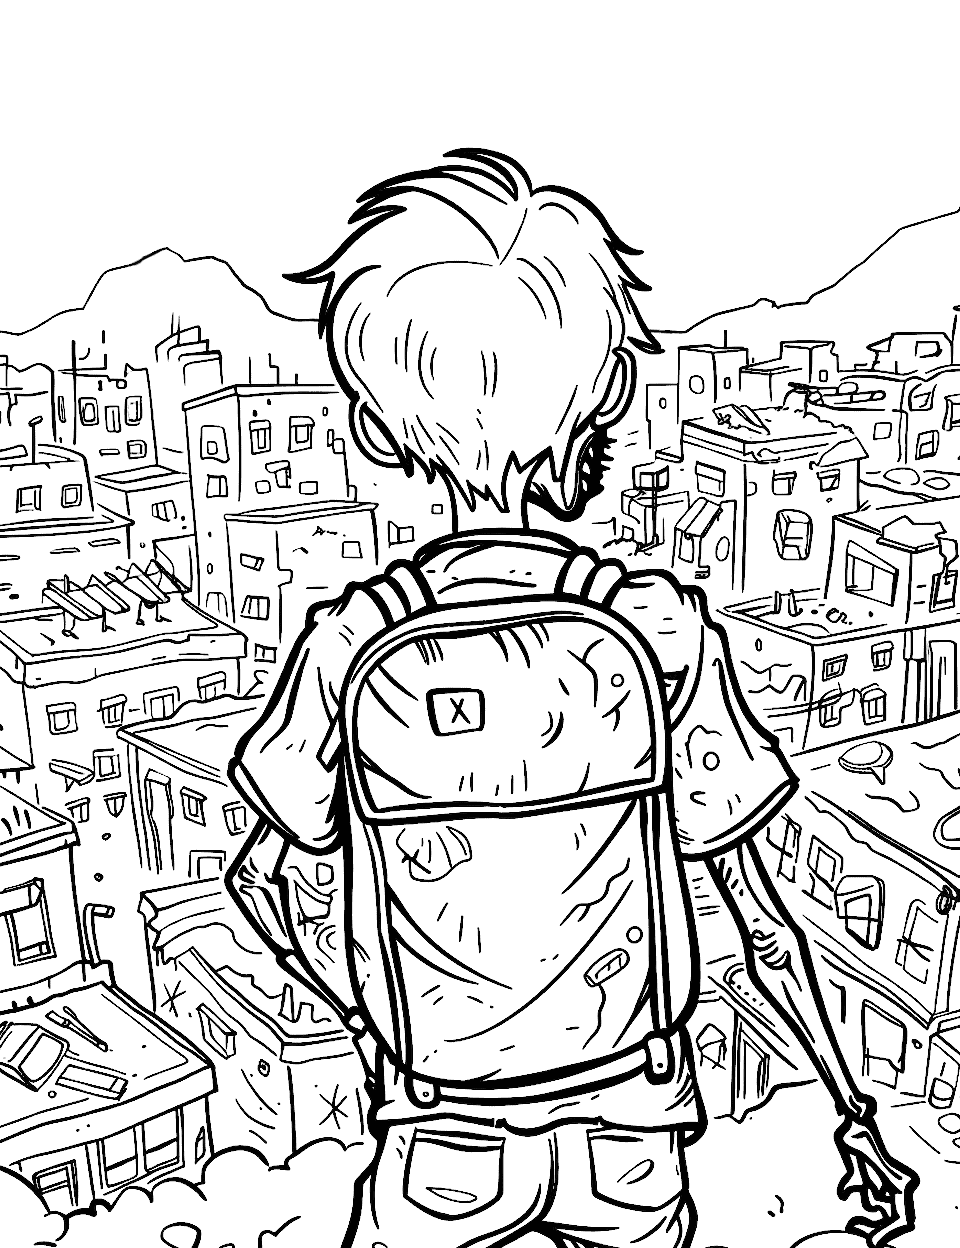 Apocalypse Survival Zombie Coloring Page - A mutant zombie with a backpack looking over a city before its attack.